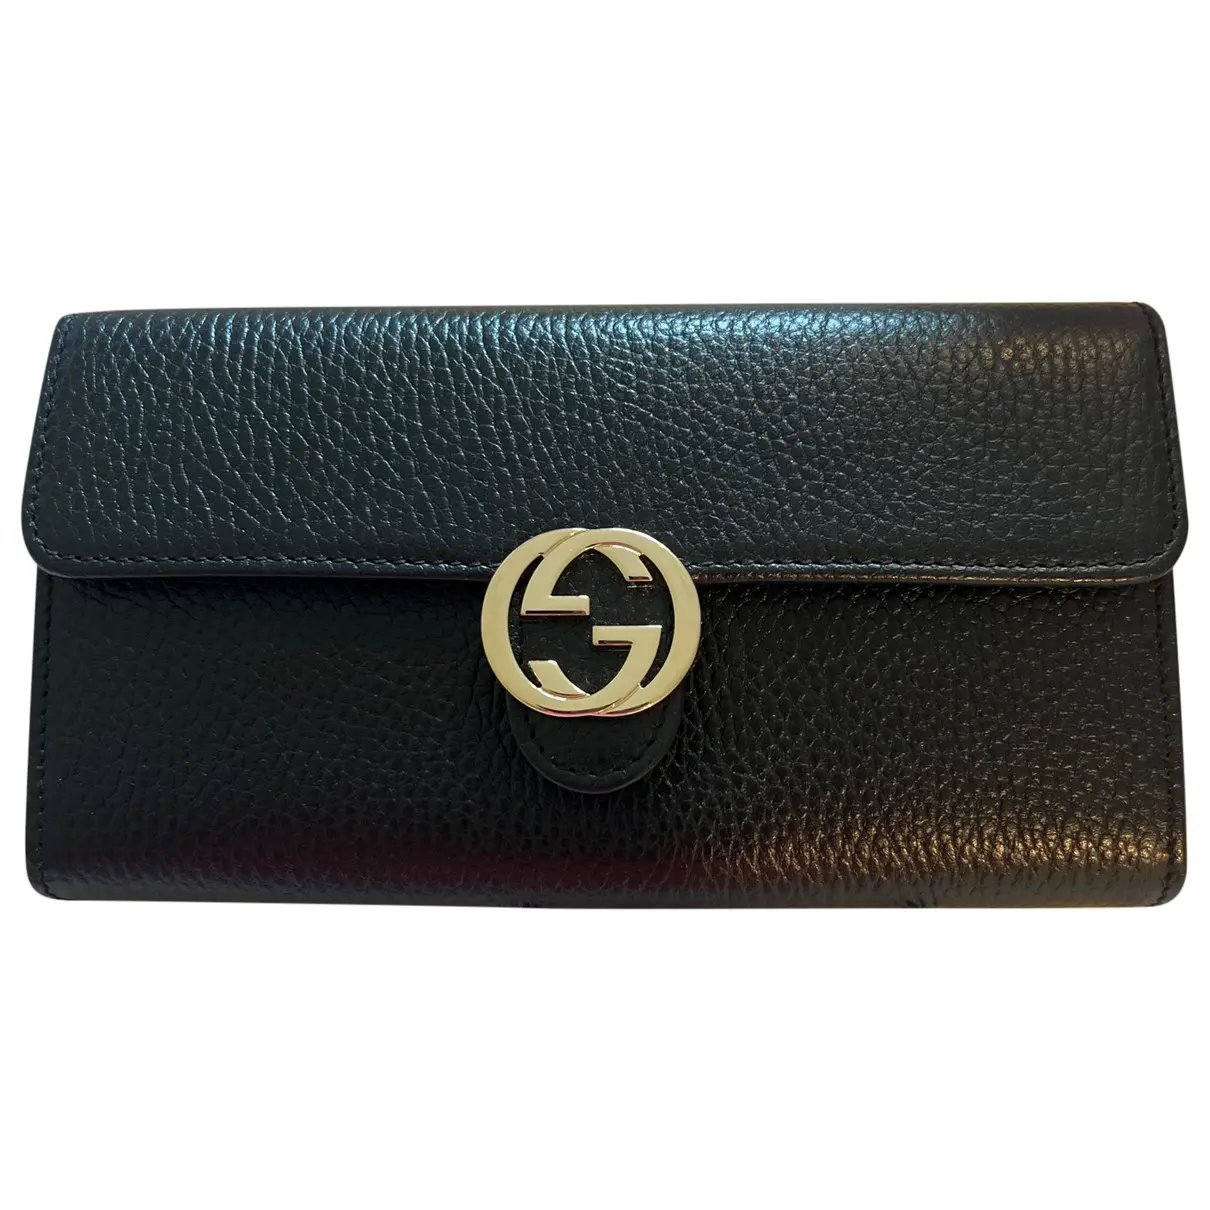 Marmont patent leather clutch bag